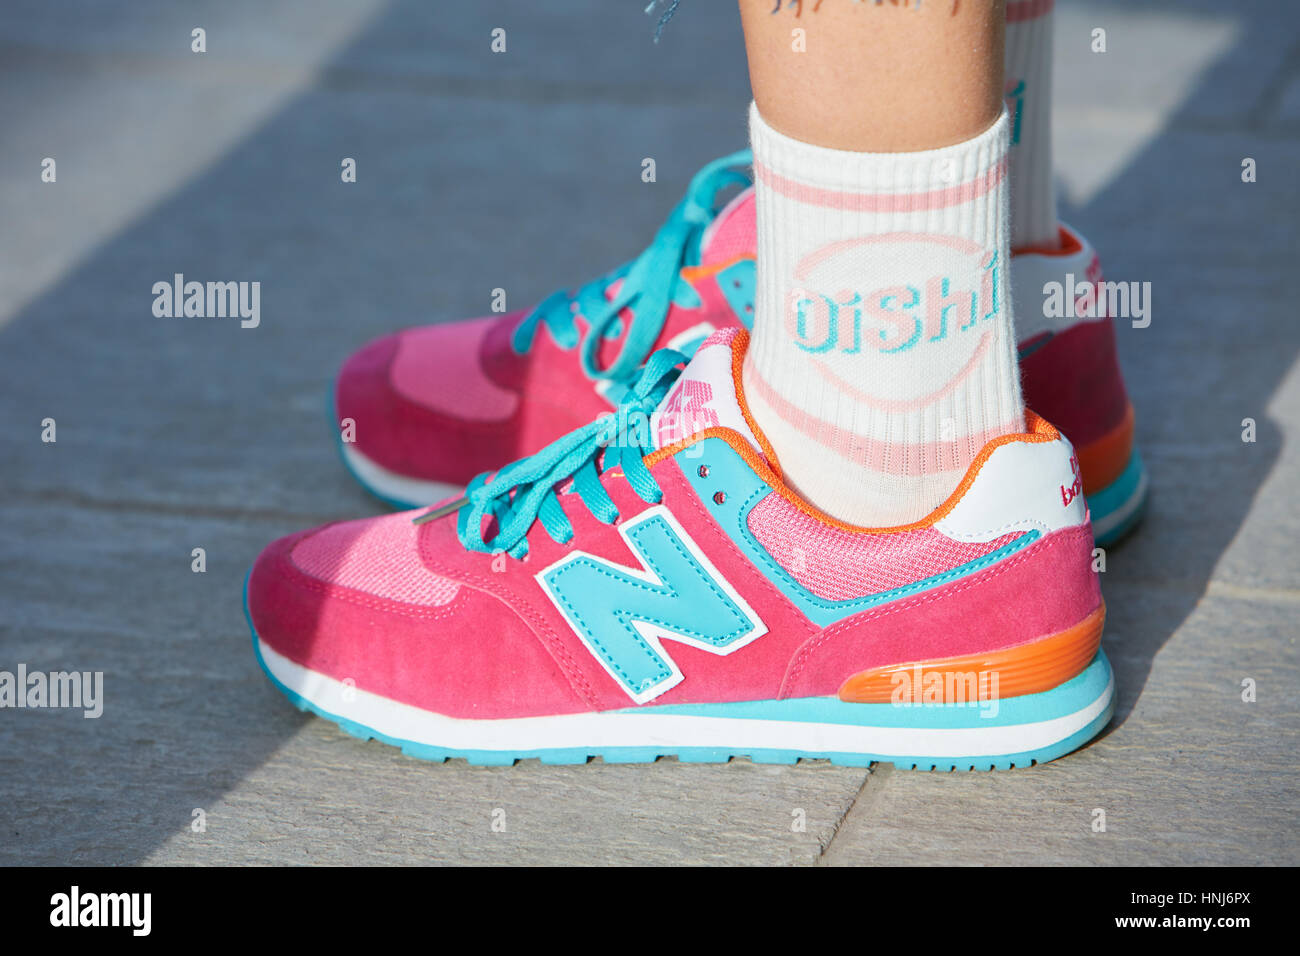 new balance pink and blue shoes